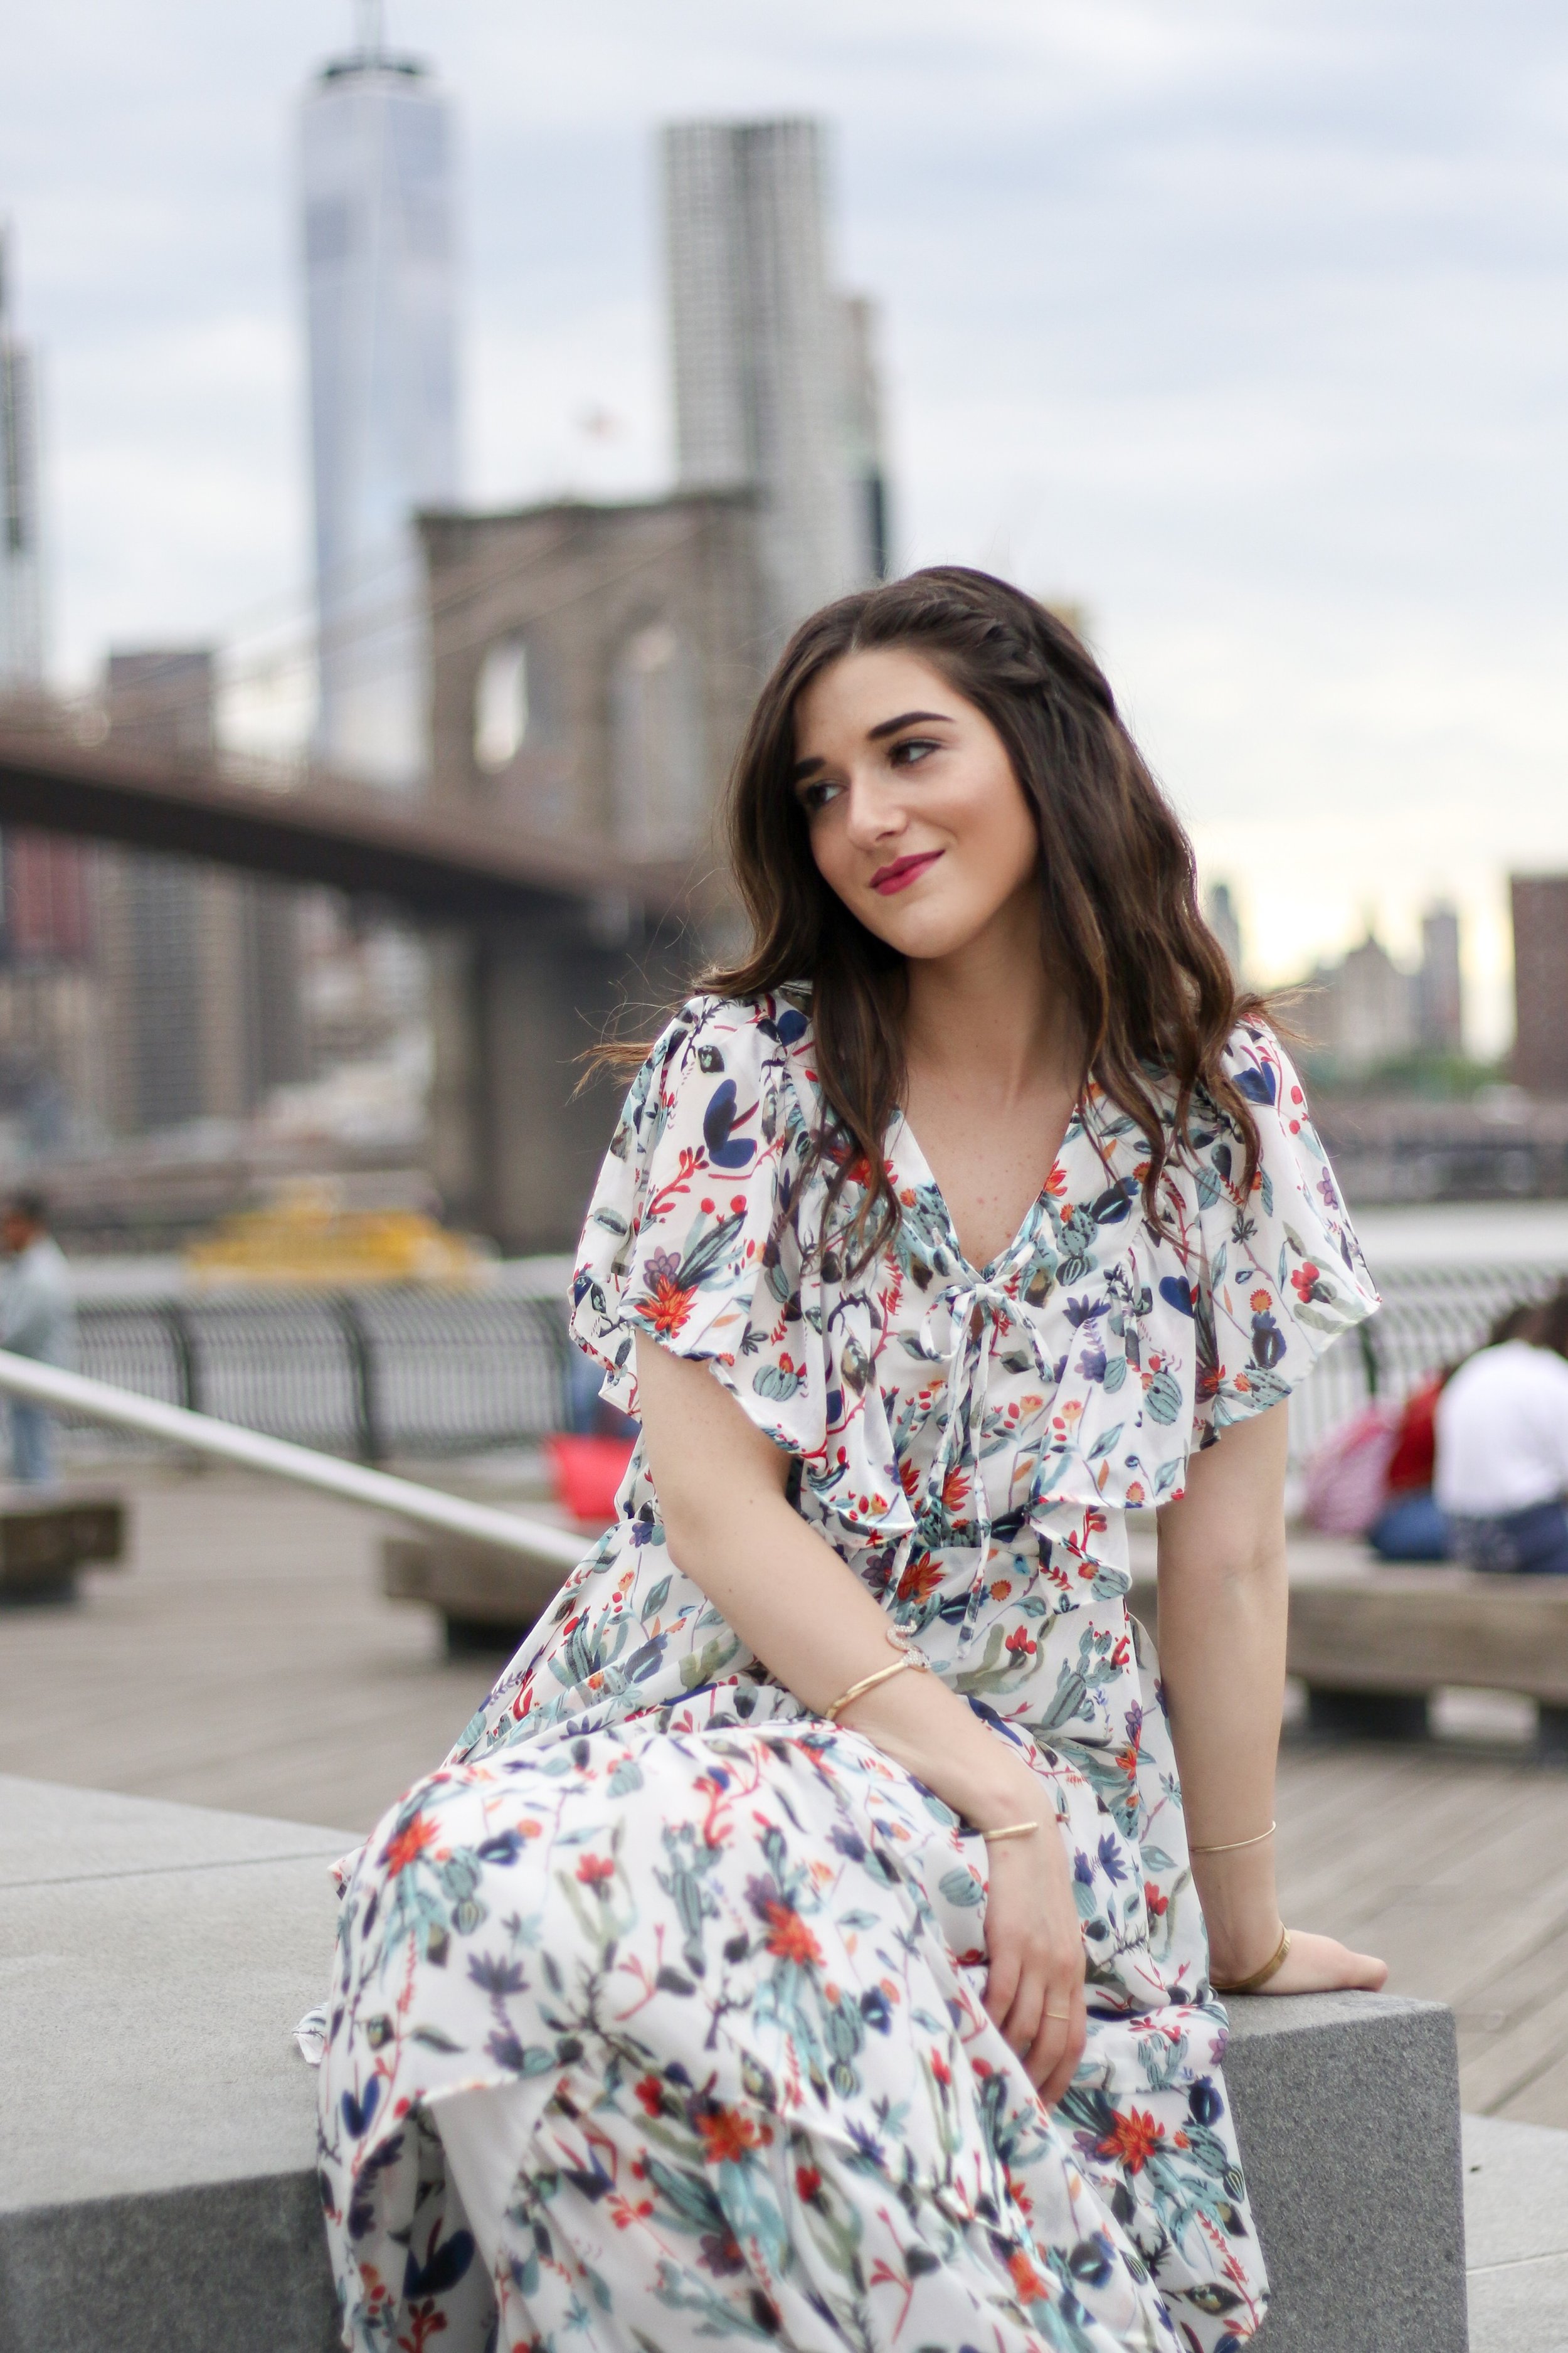 Ruffle Floral Maxi Dress Why You Should Trust Me Esther Santer Fashion Blog NYC Street Style Blogger Outfit OOTD Trendy Summer Outdoors Pretty Girly Photoshoot Feminine Beautiful Model Accessories Shoes Shop Wedges Sandals Gold Bracelets Jewelry Women.JPG